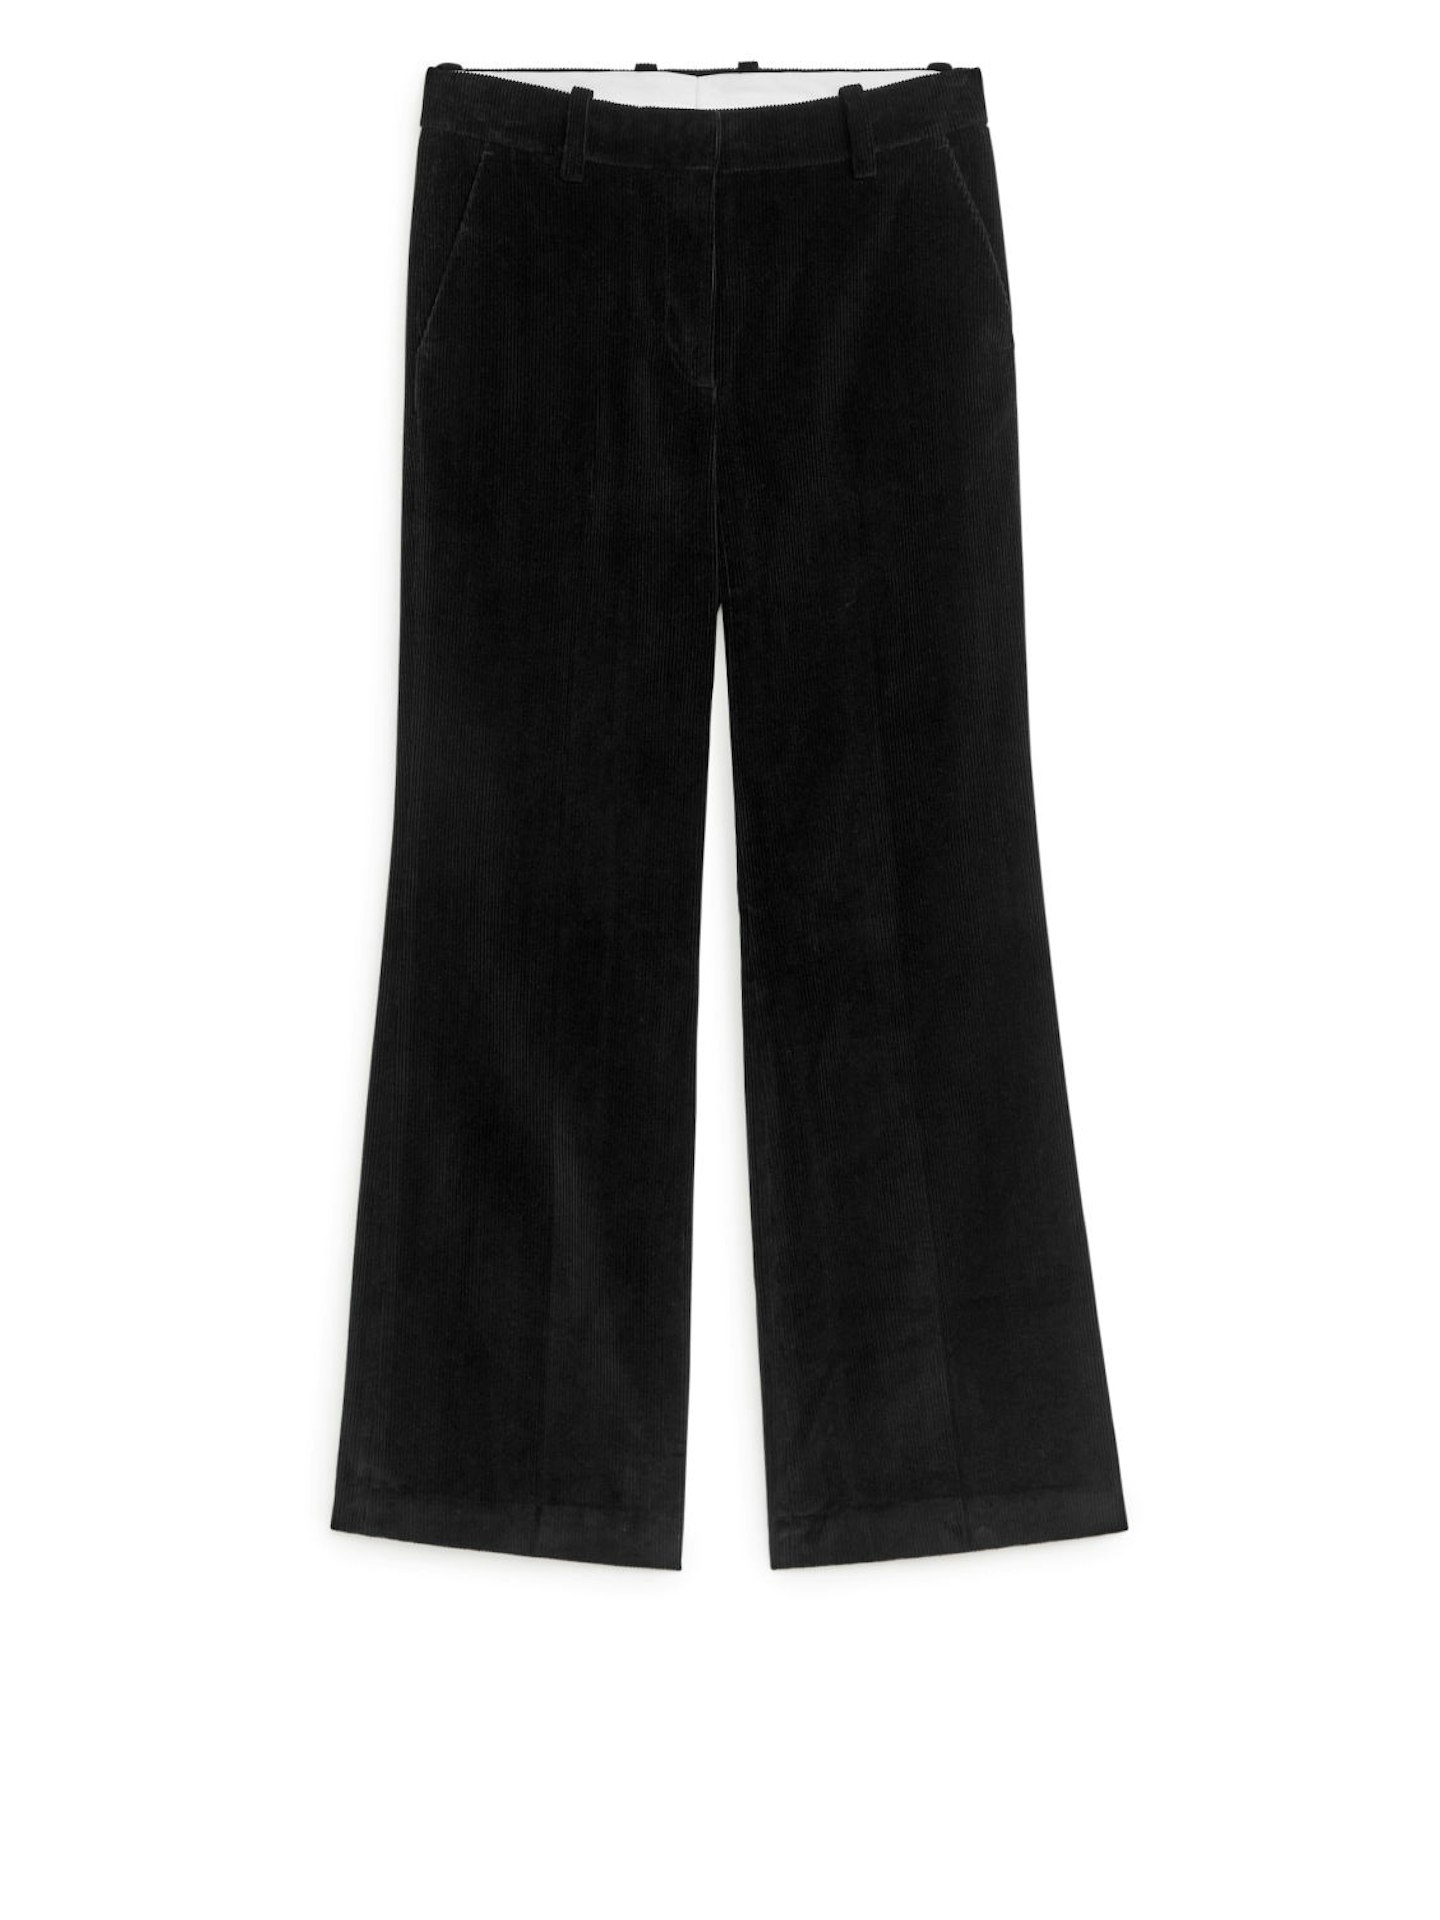 Arket, Flared Corduroy Trousers